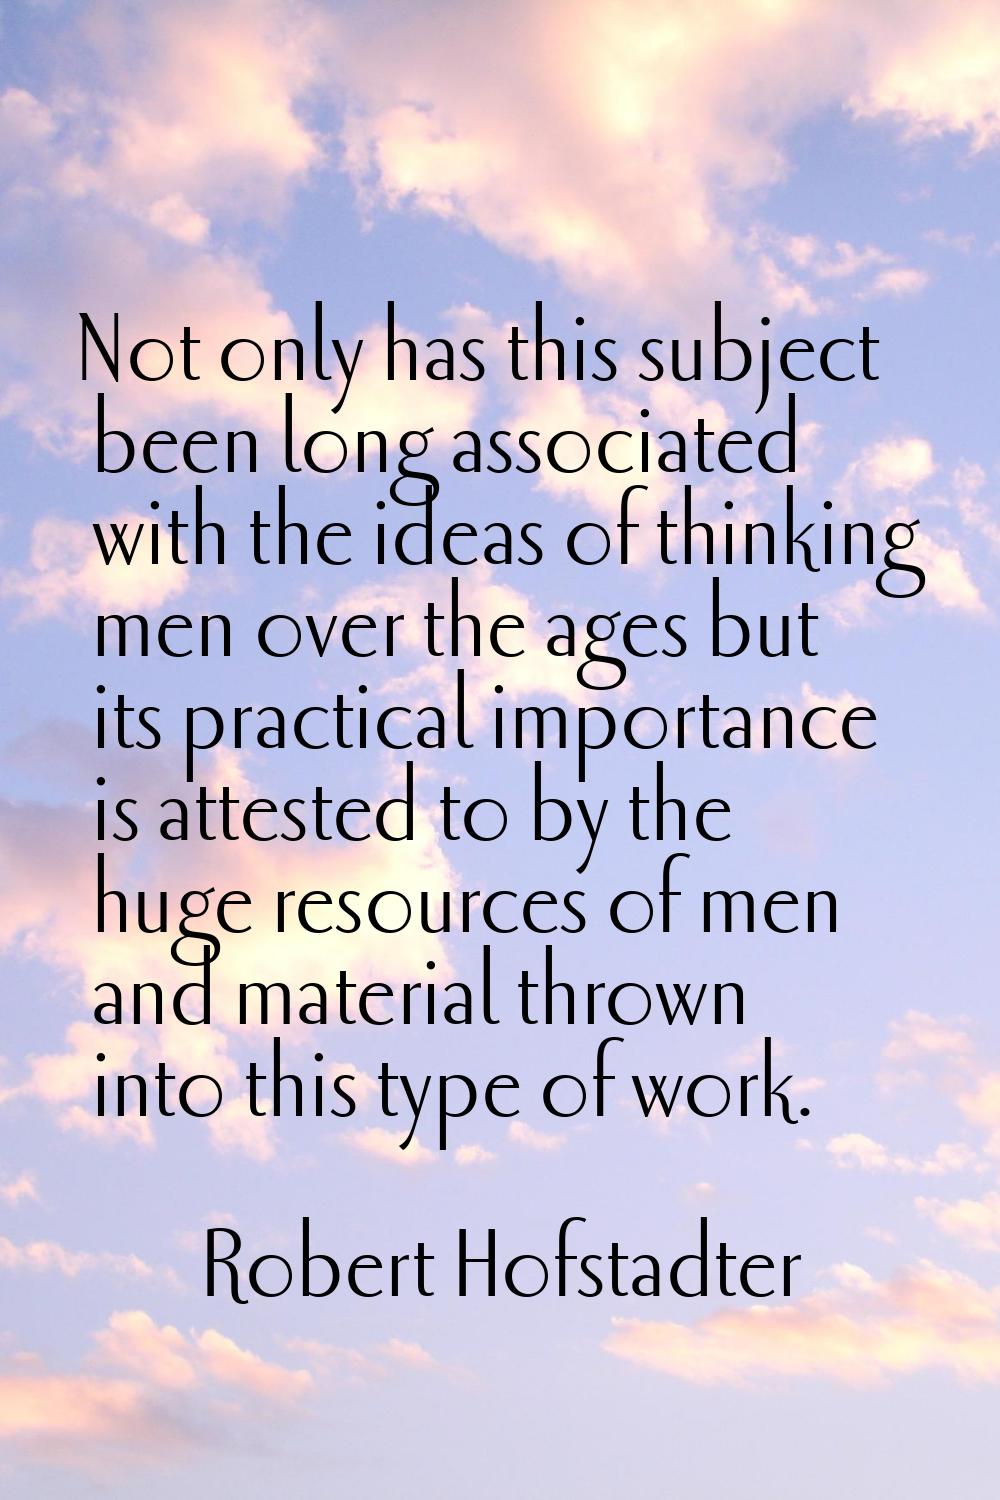 Not only has this subject been long associated with the ideas of thinking men over the ages but its